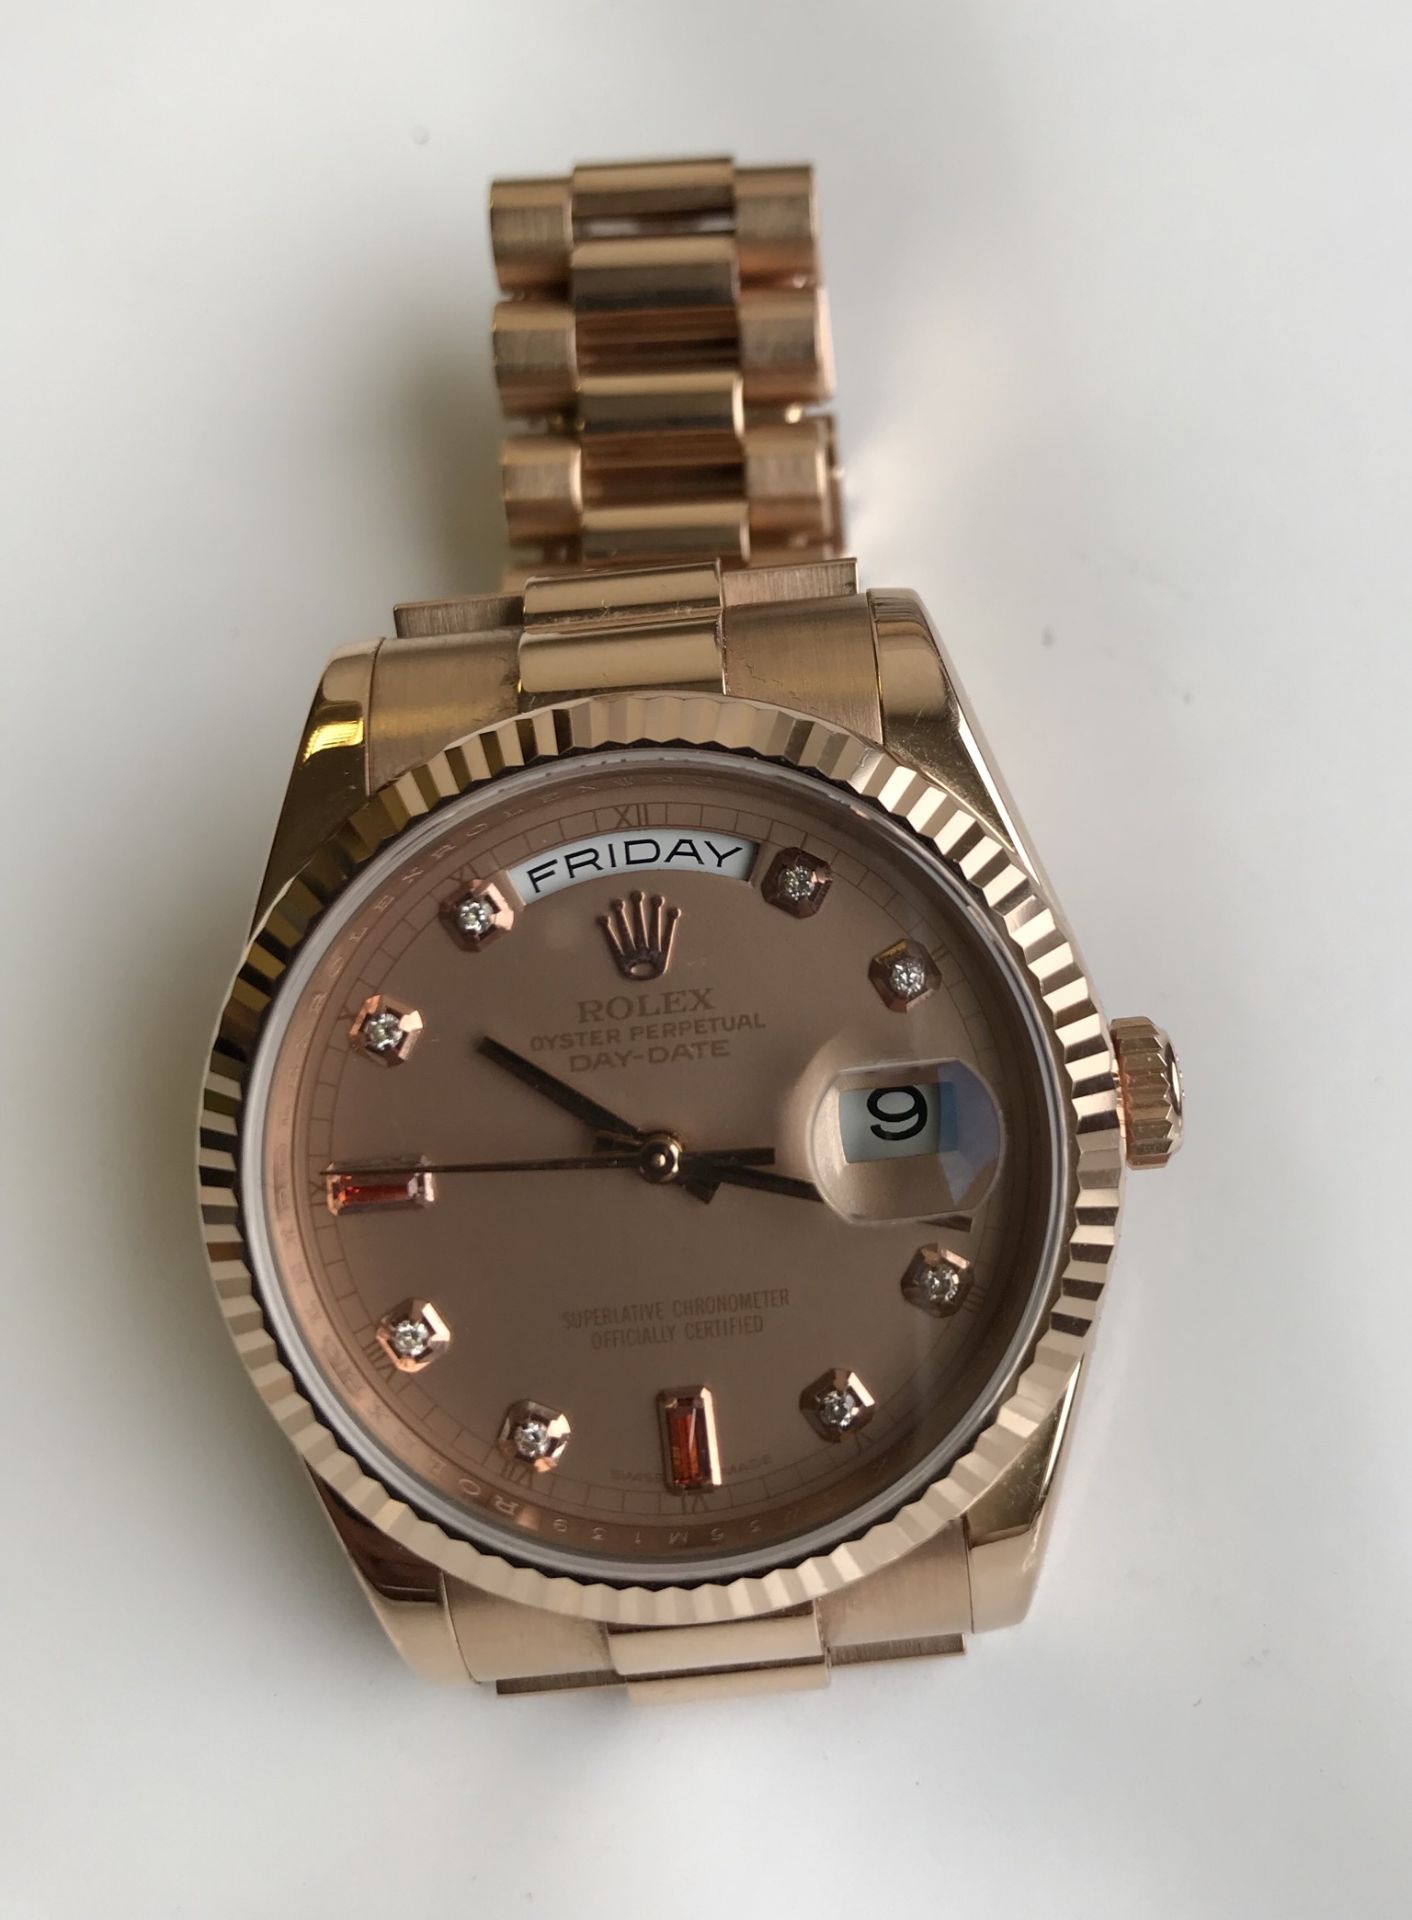 Rolex day date Rose gold - Image 3 of 9